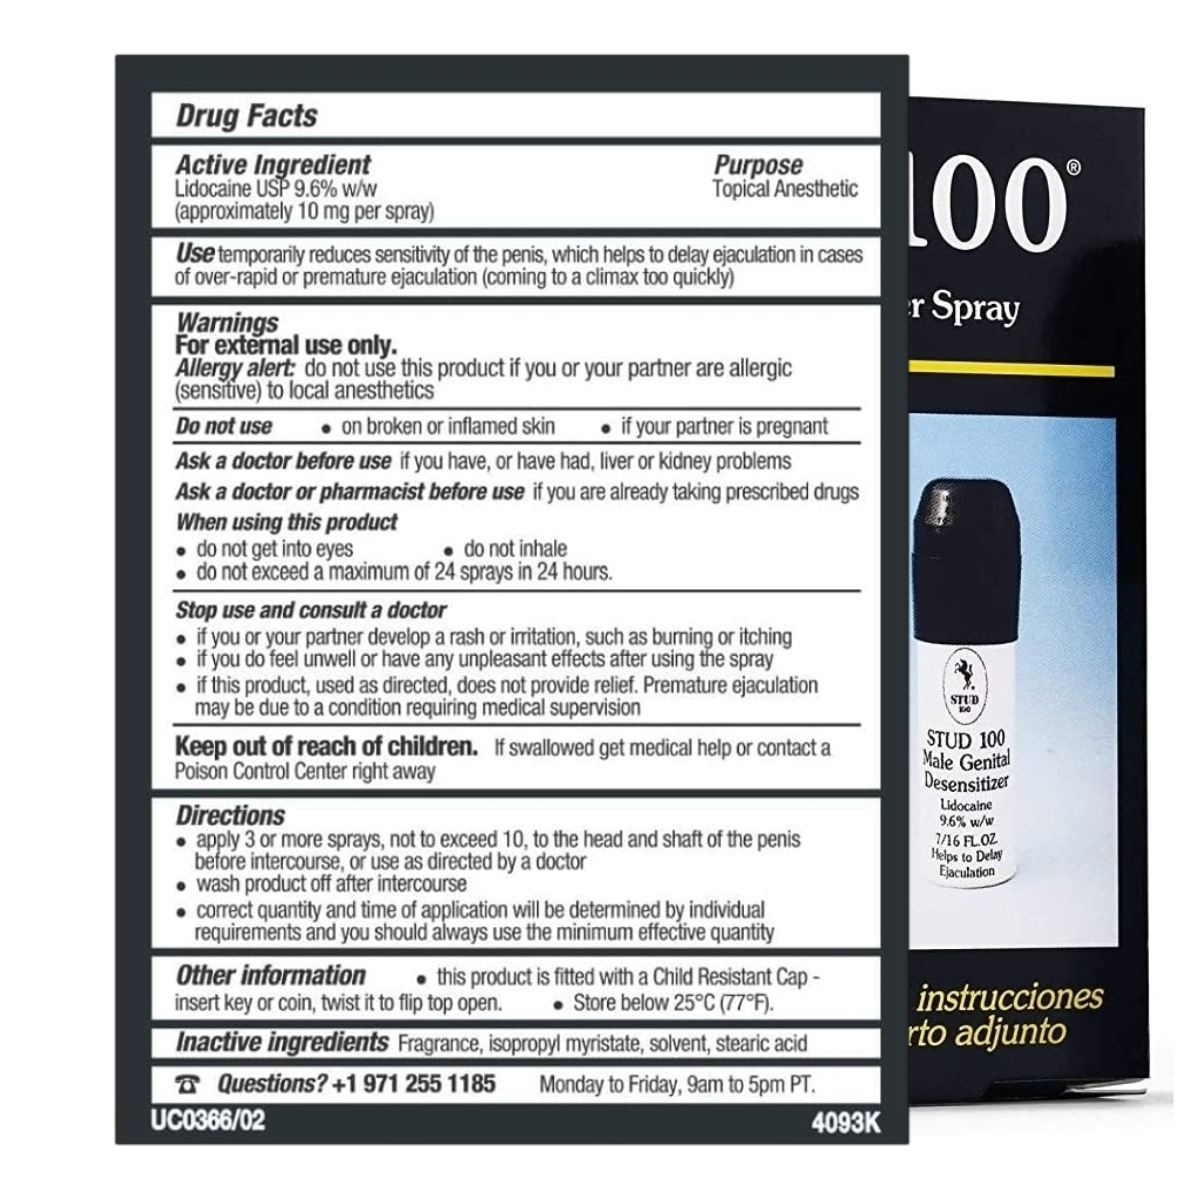 stud 100 desensitizing spray for men 12g ingredients list instructions how to use packaging